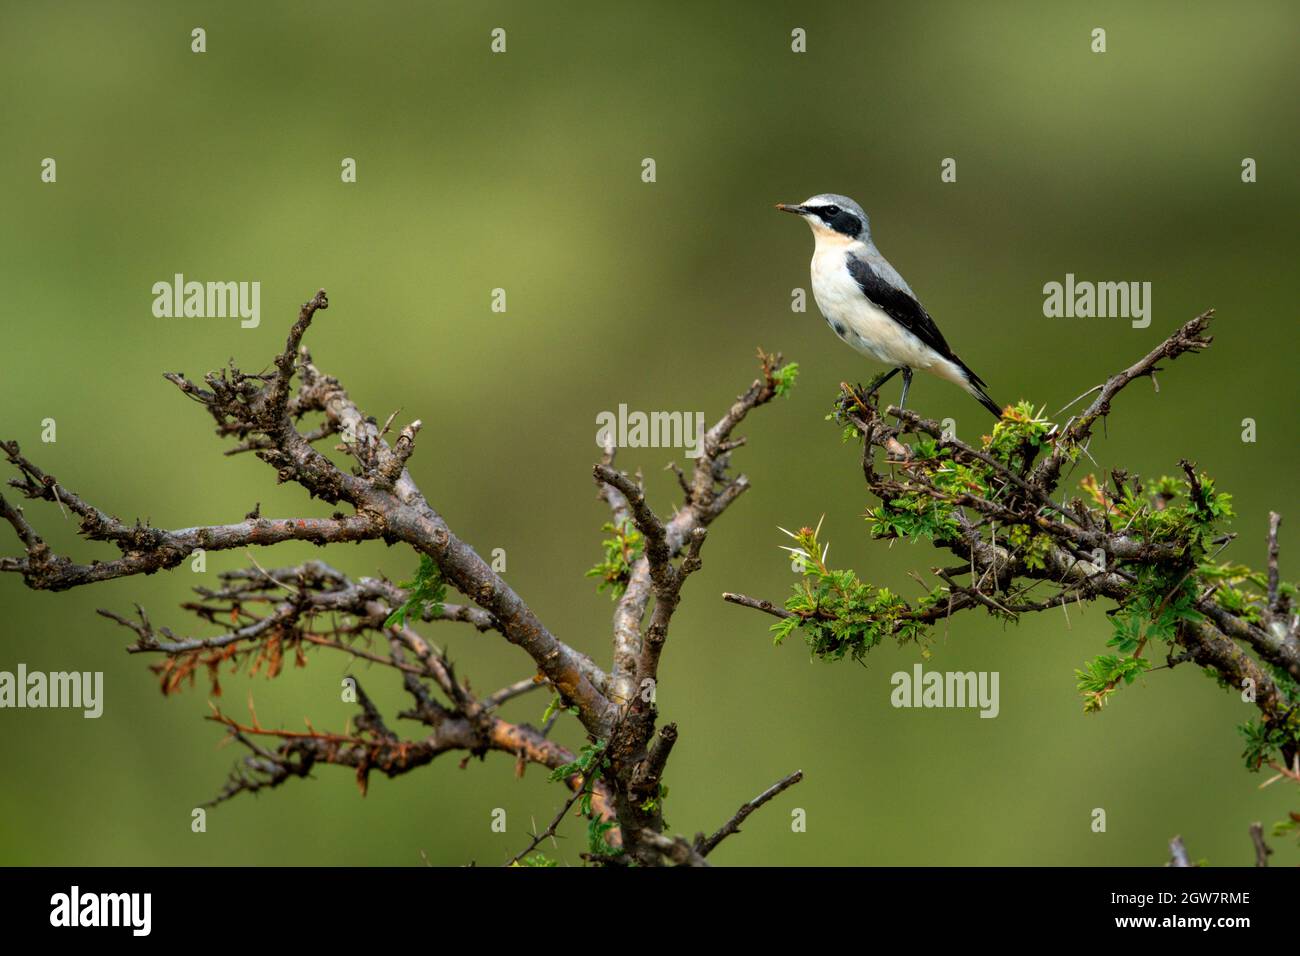 Grey-backed Fiscal In Thornbush With Green Bokeh Stock Photo